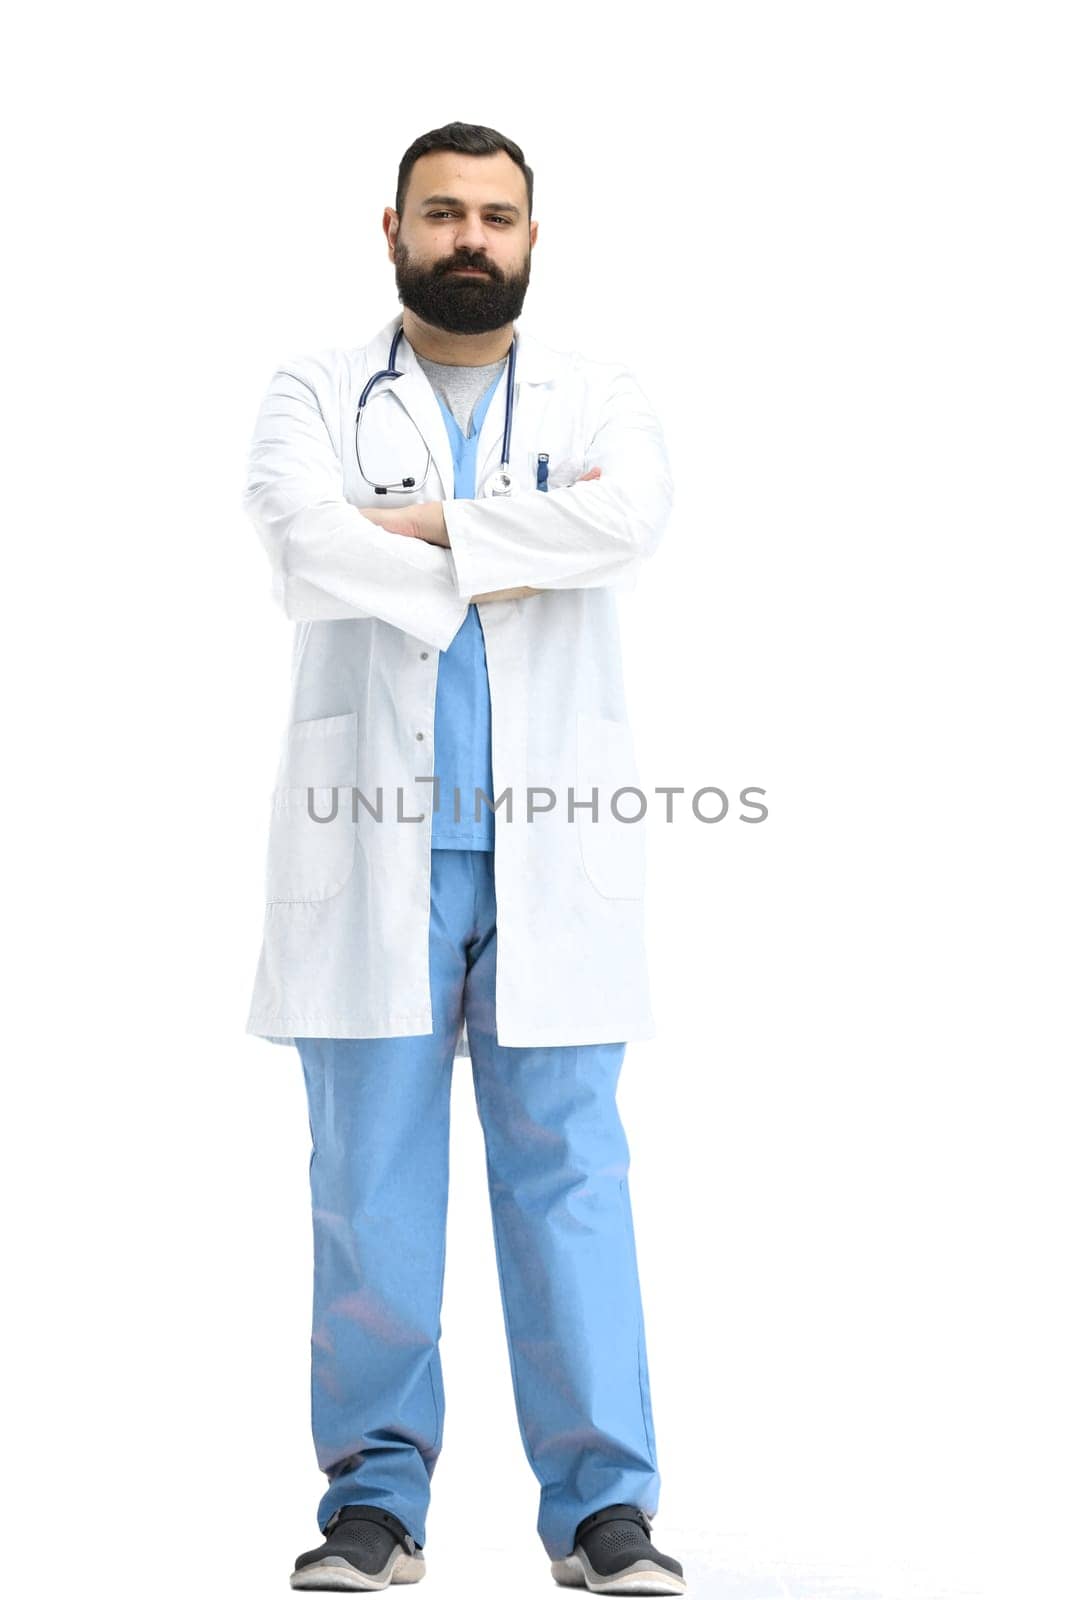 The male doctor, full-length, on a white background, crossed his arms.